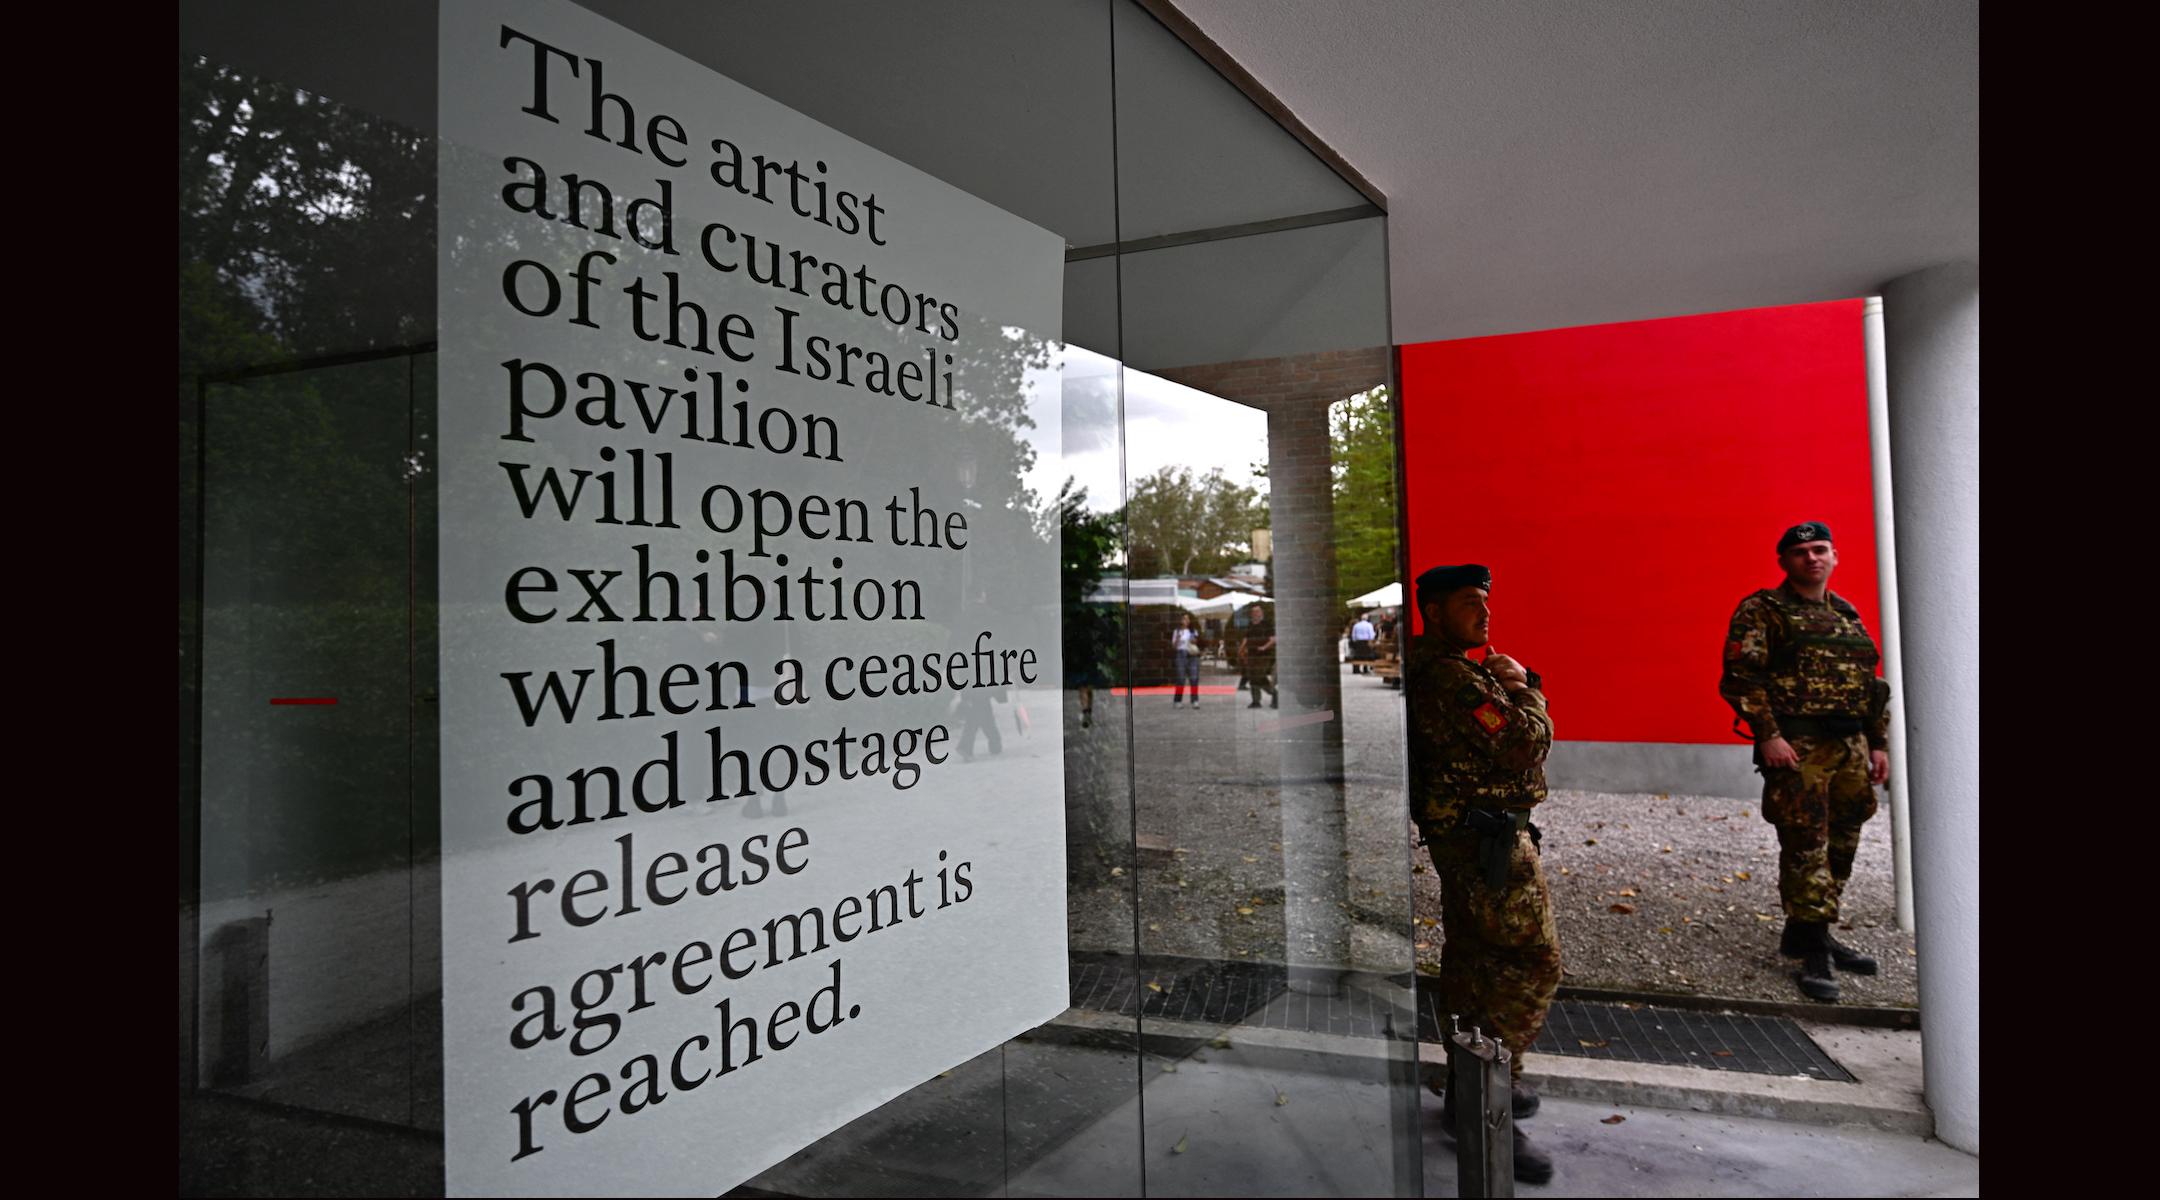 Italian soldiers stand guard in front of Israel’s pavilion during the pre-opening of the Venice Biennale art show, on April 16, 2024 in Venice. The artist representing Israel at the Venice Biennale, Ruth Patir, called for a ceasefire in the war with Hamas and said her exhibit would remain closed until the hostages were released. (Gabriel Bouys/ AFP via Getty Images)